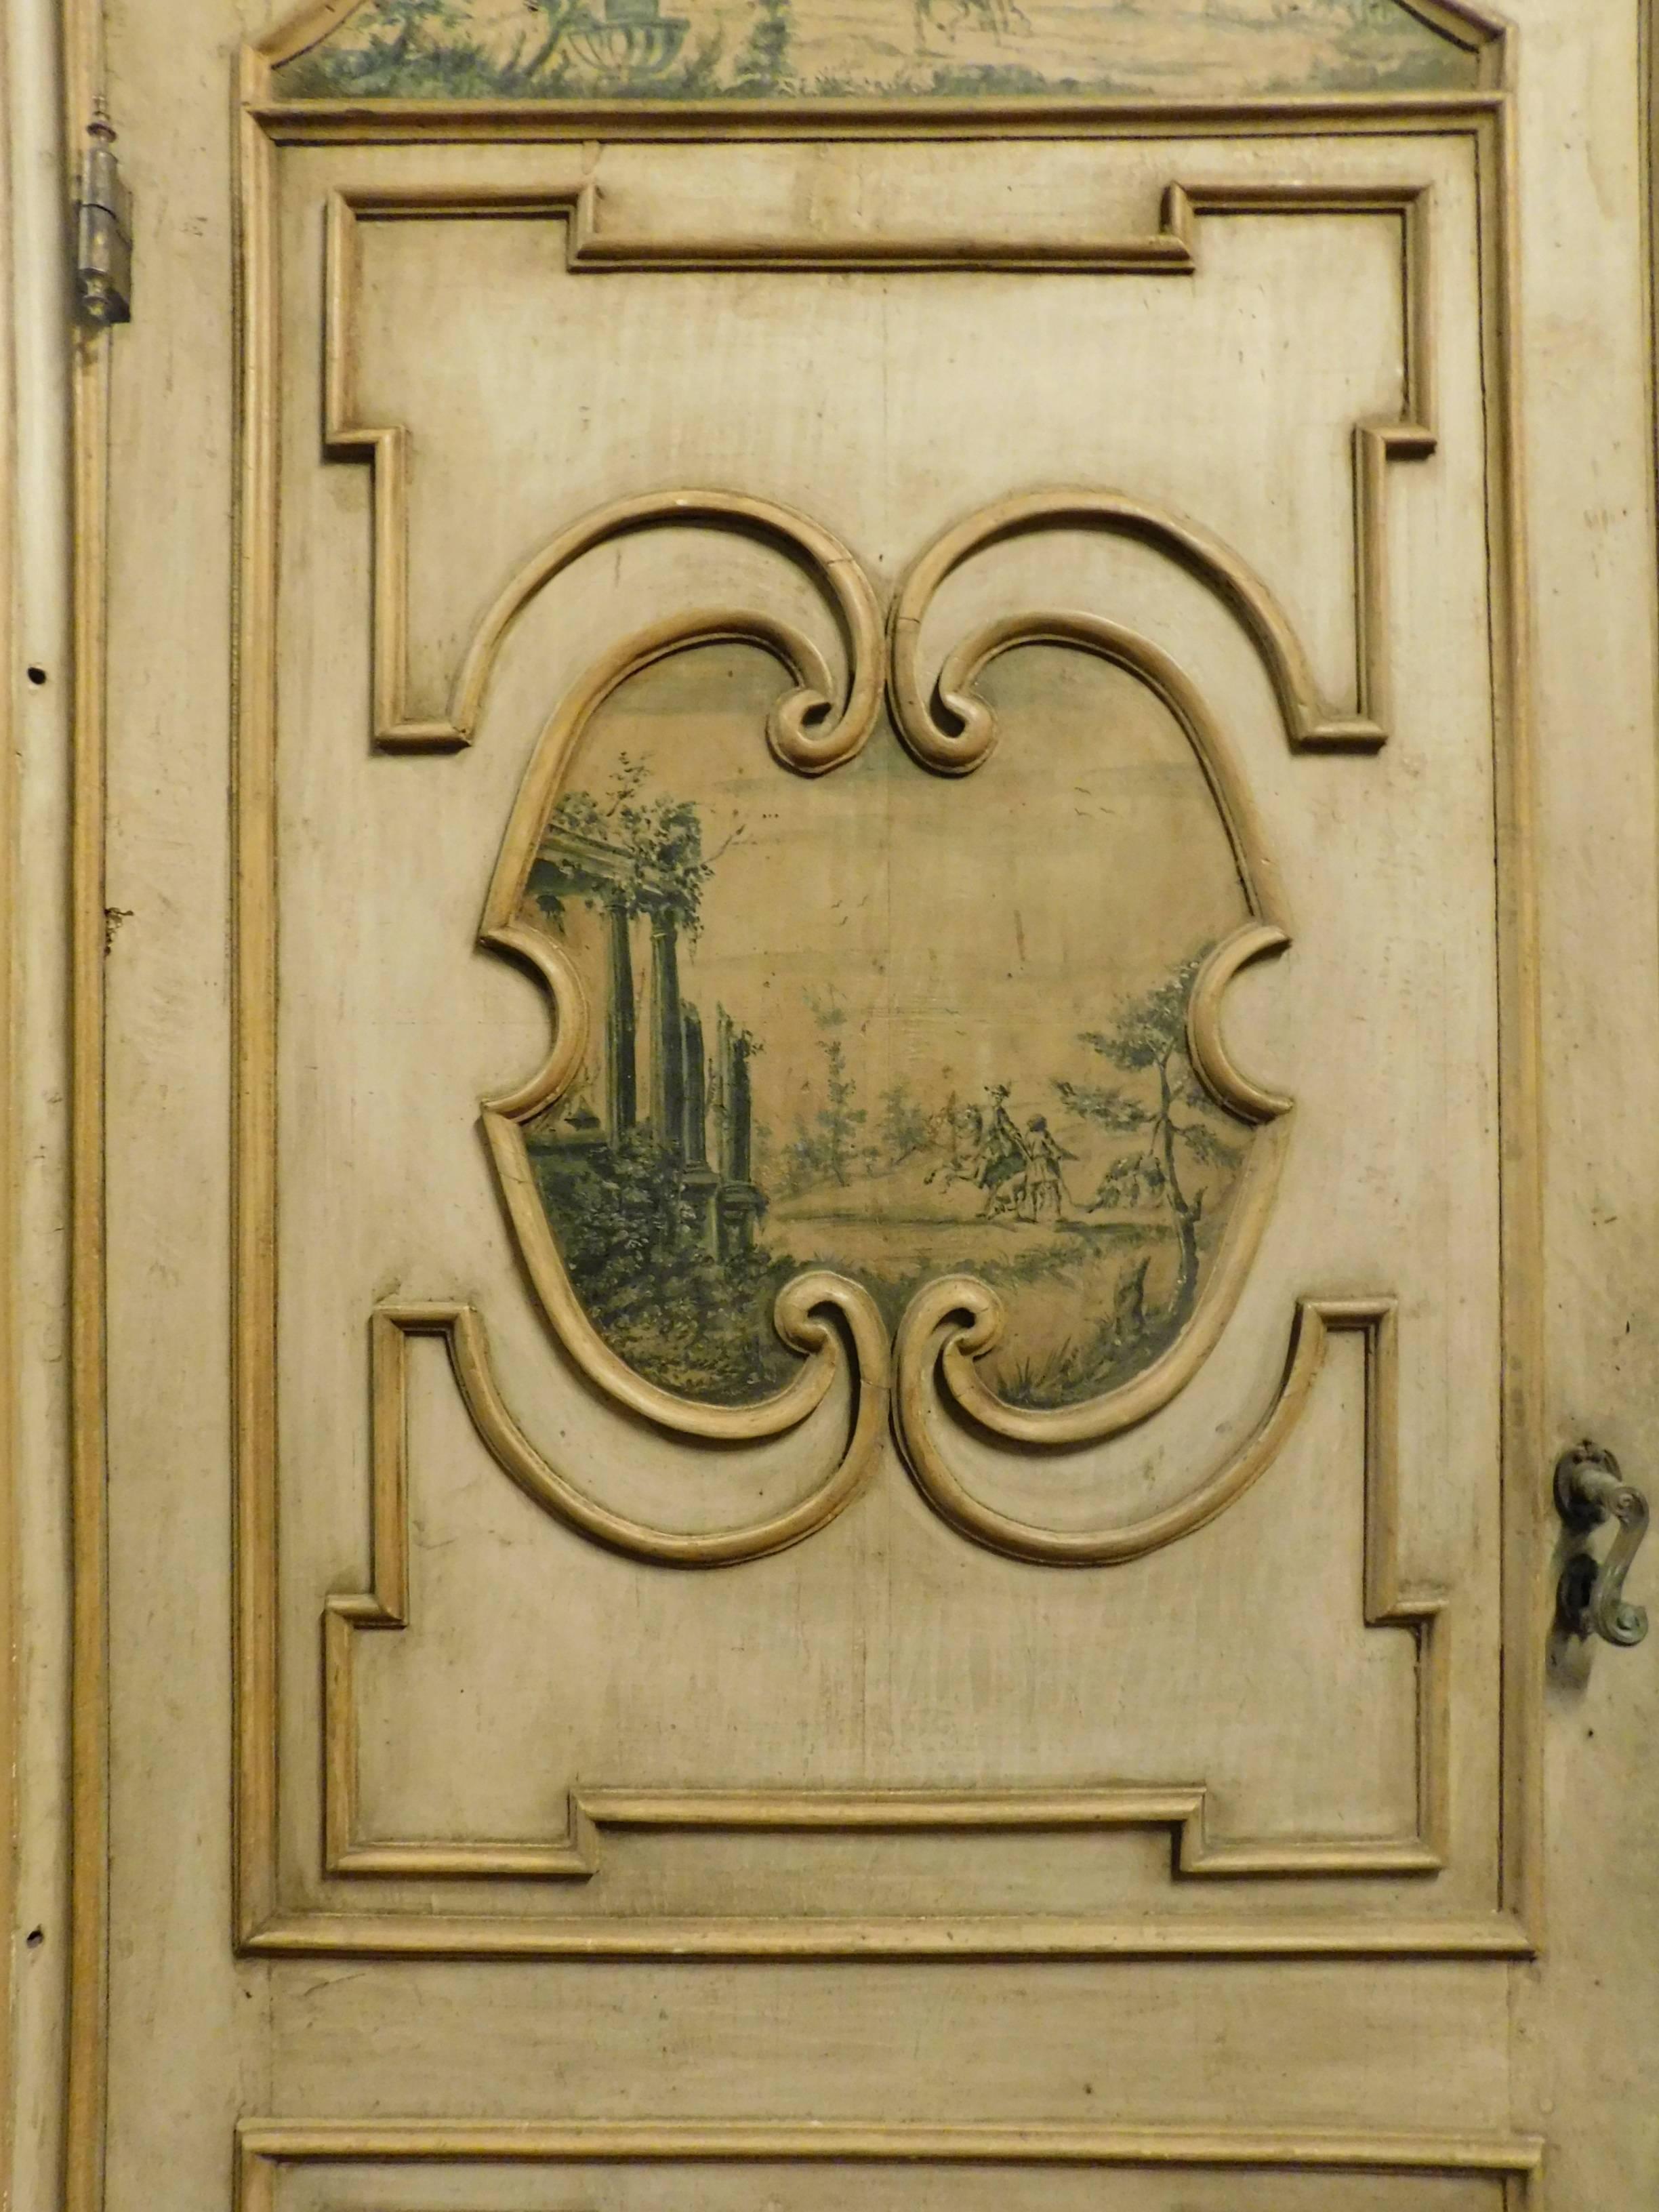 18th century lacquered door 
Painted on both sides
Dimensions of the door: 110 cm x 255 cm height
Dimensions of the frame: 138 cm x 270 cm height.